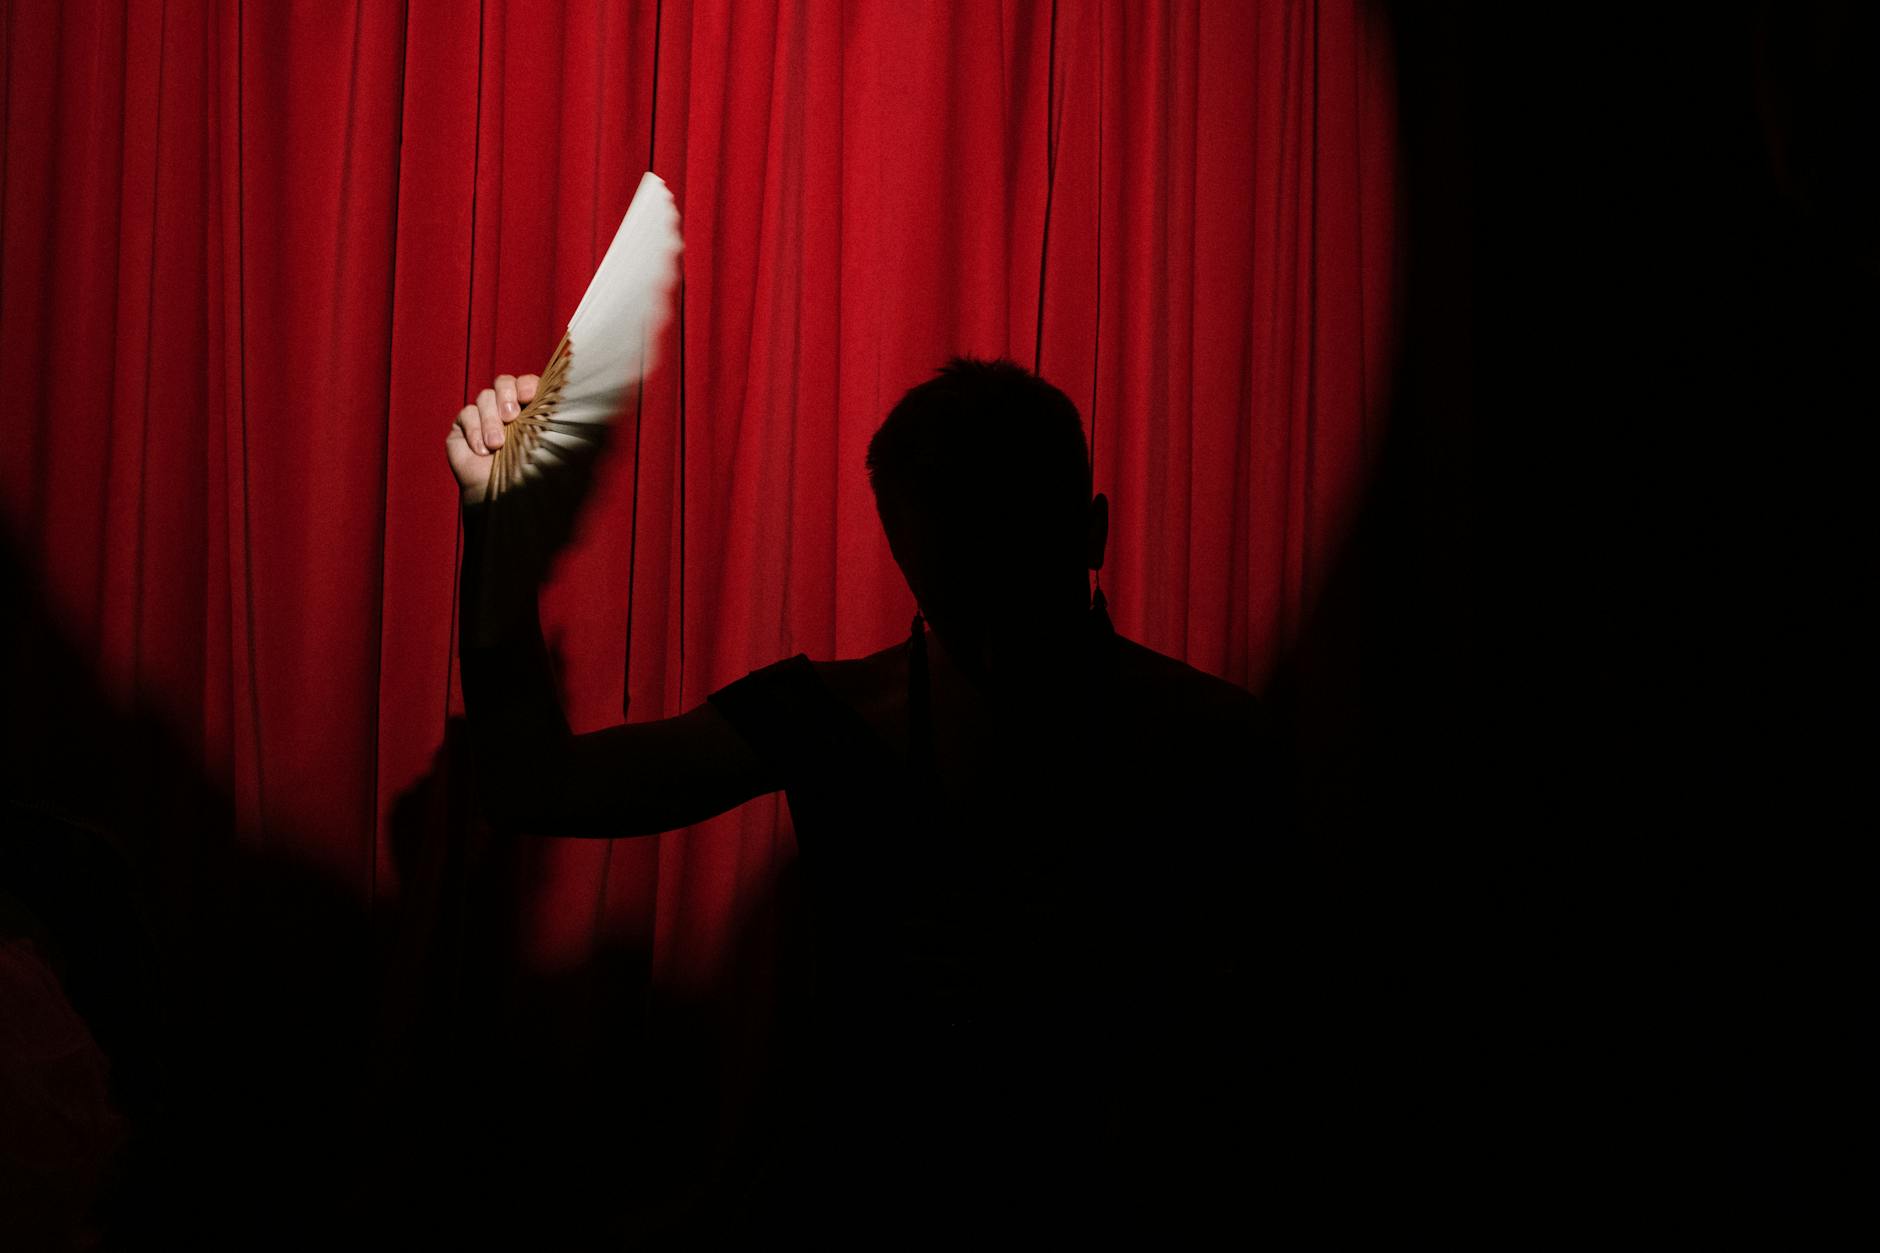 Silhouette of a Person Holding a Hand Fan on Stage